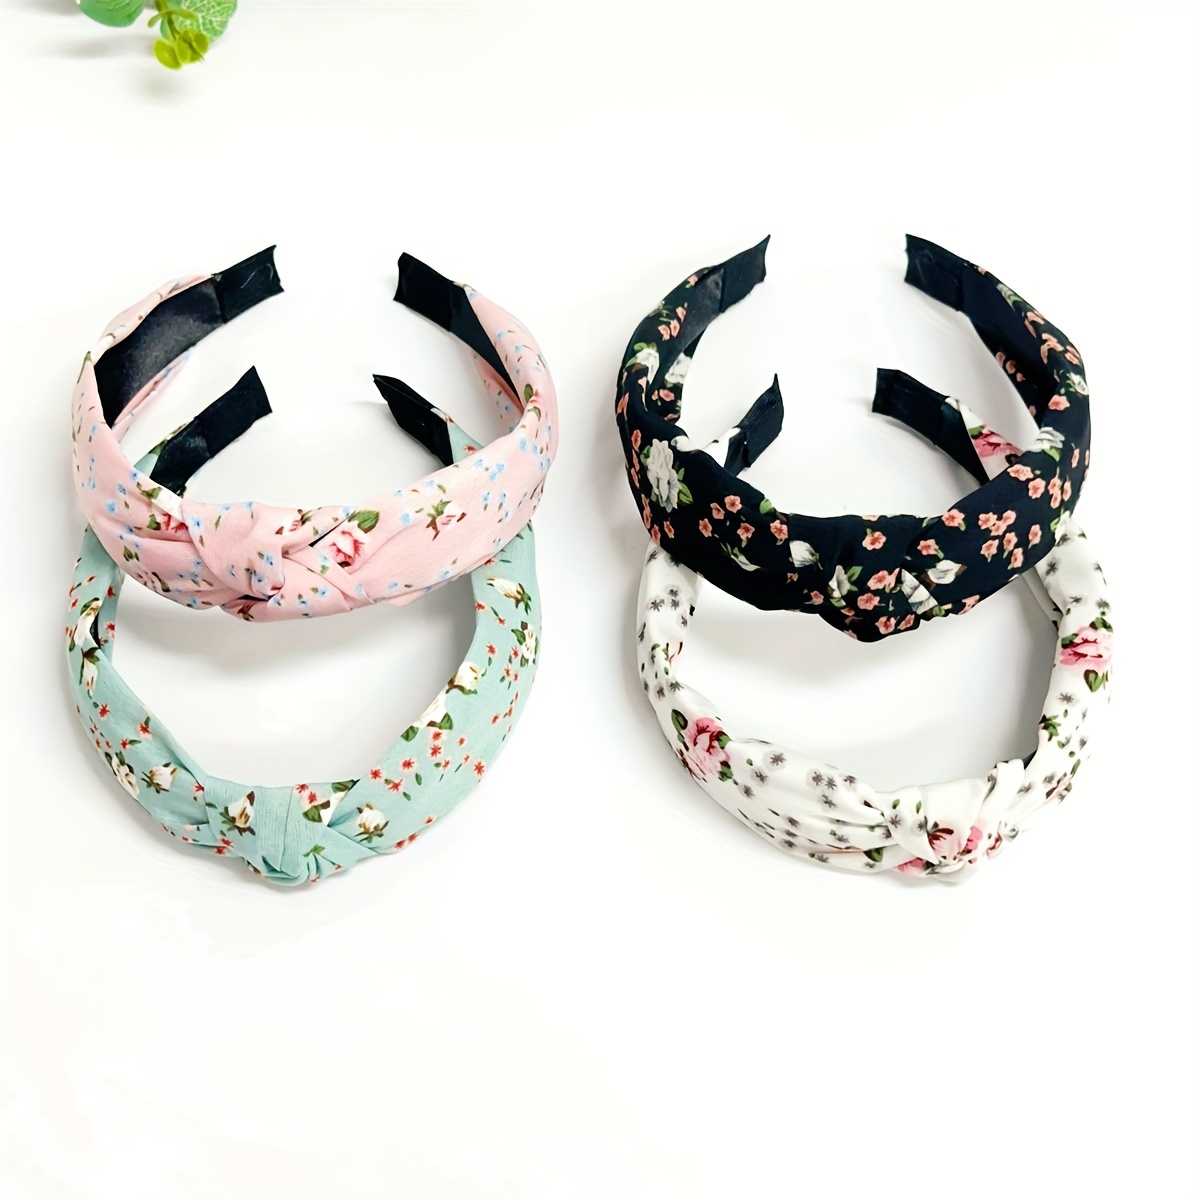 

4-piece Boho Chic Floral Knotted Headband Set - Wide, Sweet & Fresh Fabric Hairbands For Women | Perfect For Summer Vacations